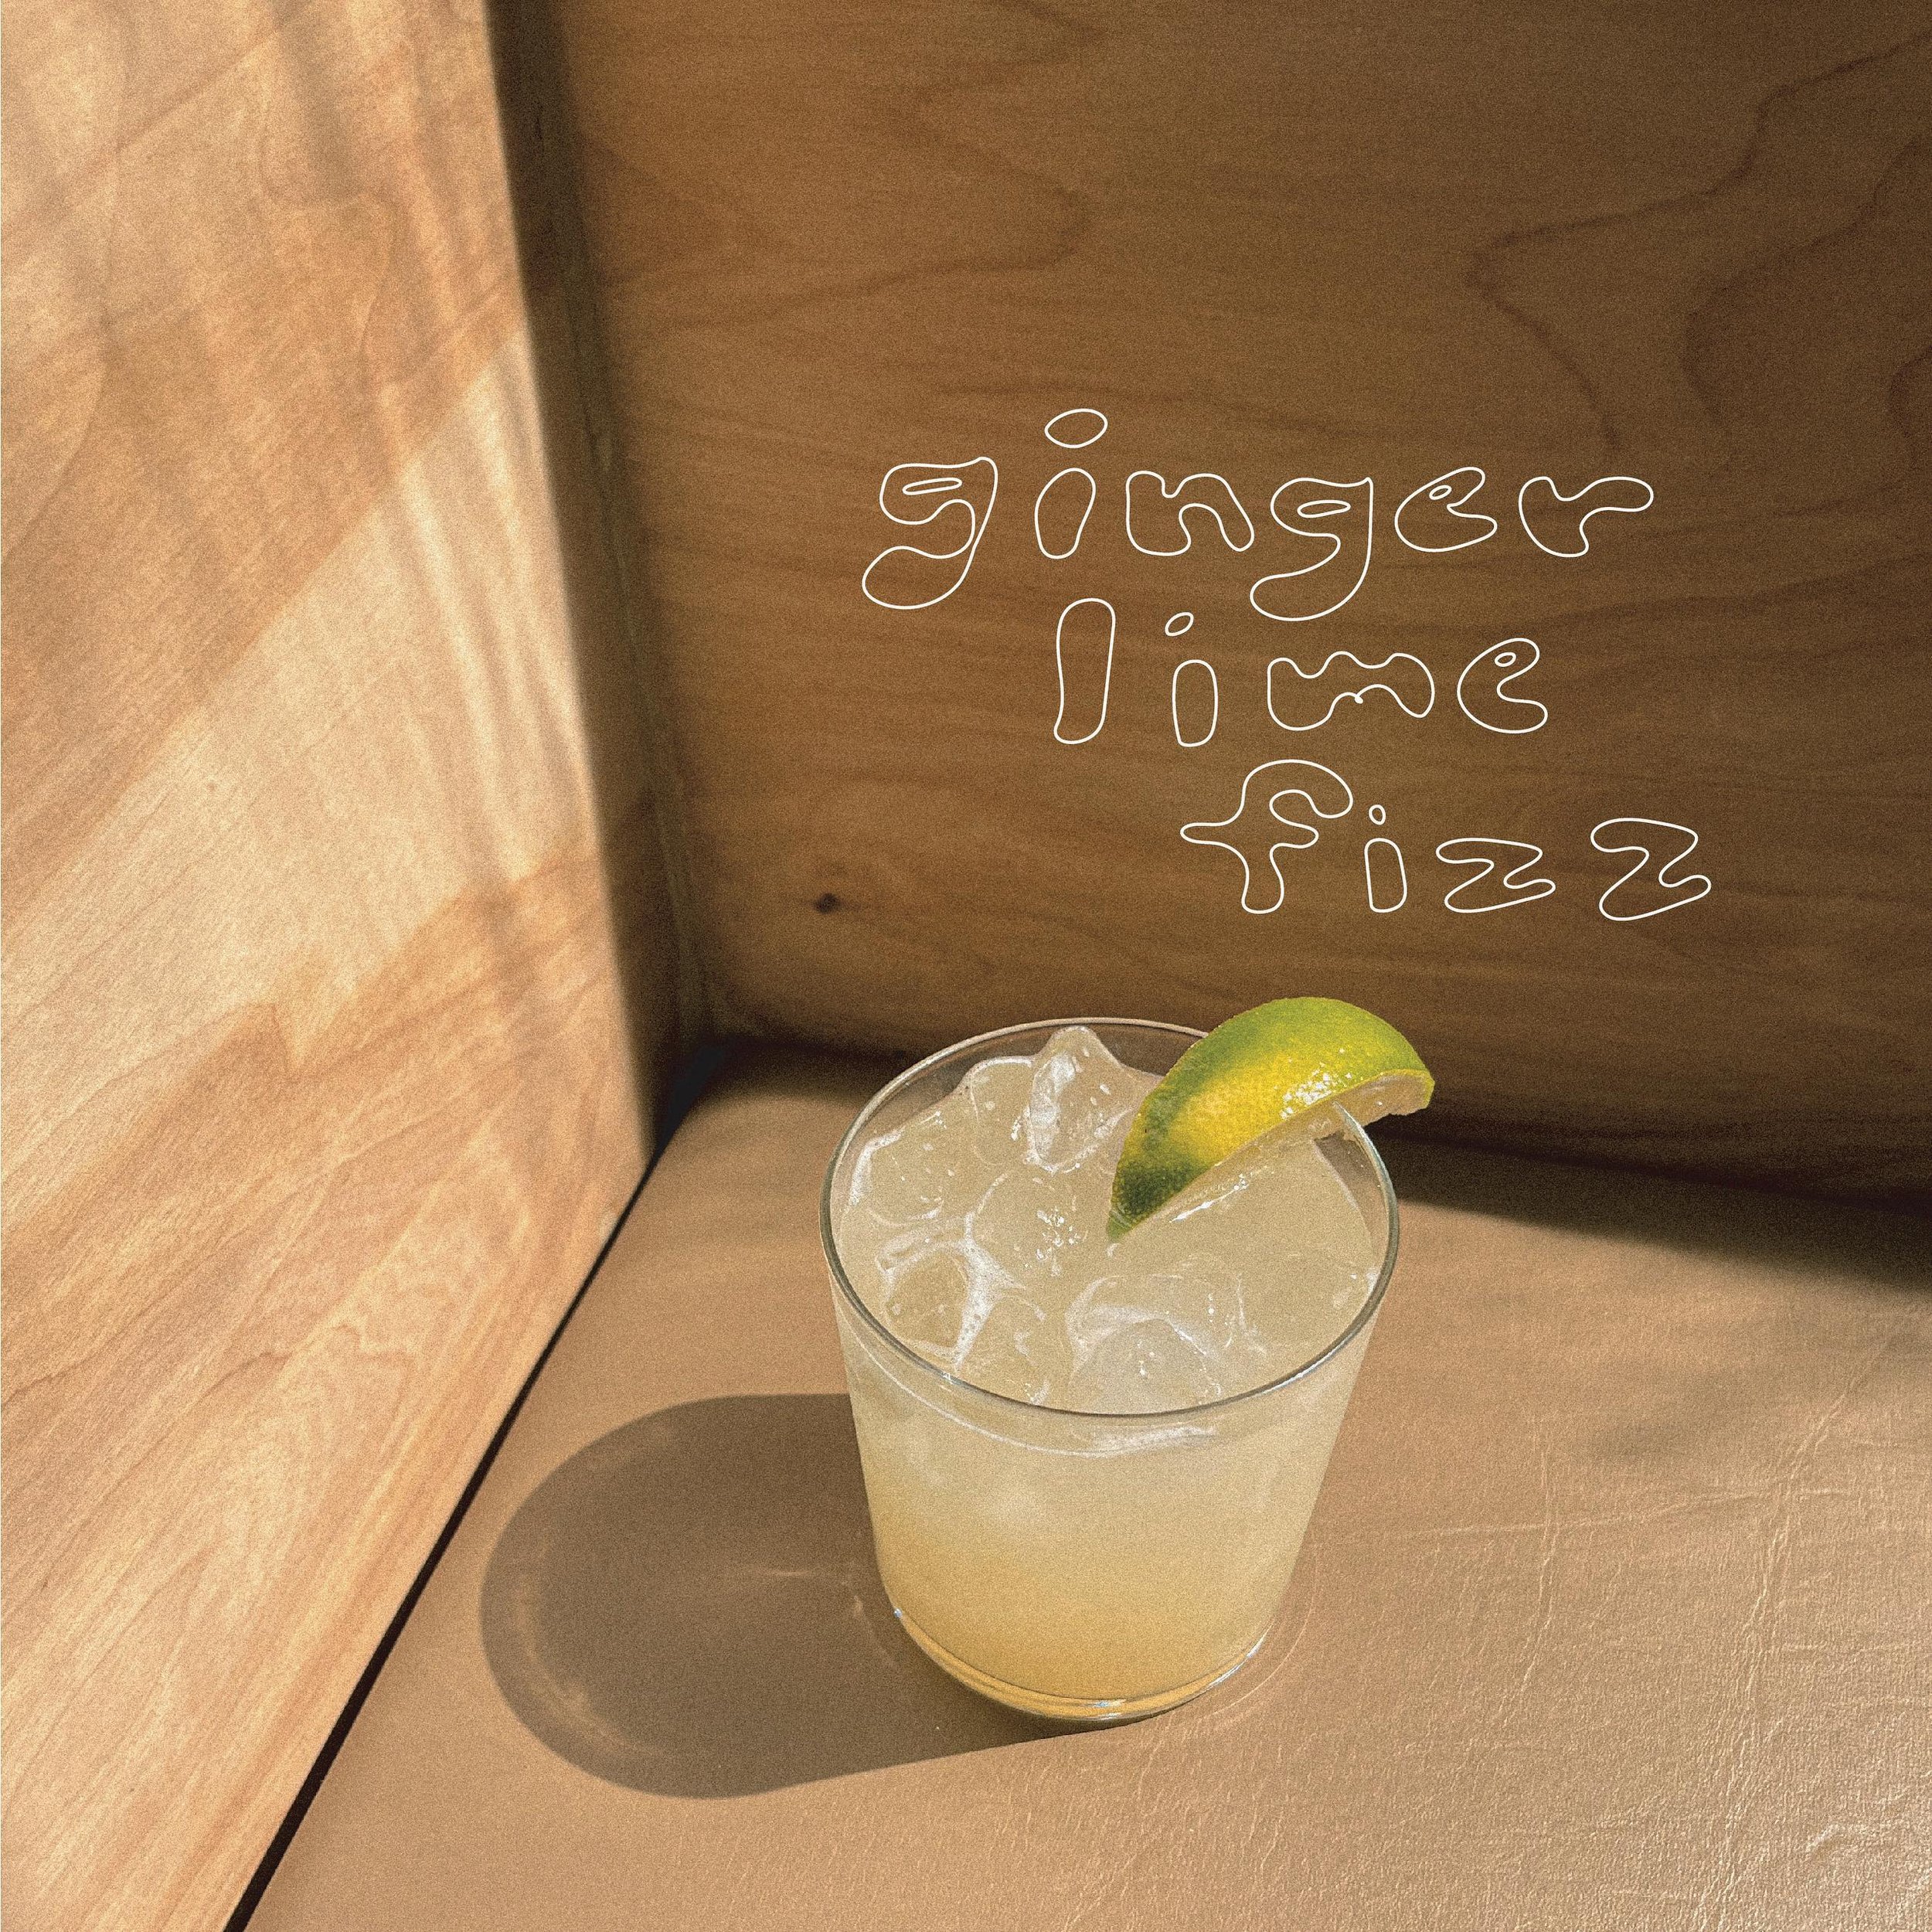 ginger lime fizz ✨✨✨✨✨ 

our new cocktail is out just in time for patio weather &lt;3 

@lbdistillers vodka, ginger syrup, lime, soda 

perfectly refreshing ! delicious ! punchy ! 

open 3 to 11&ndash; see ya soon friends